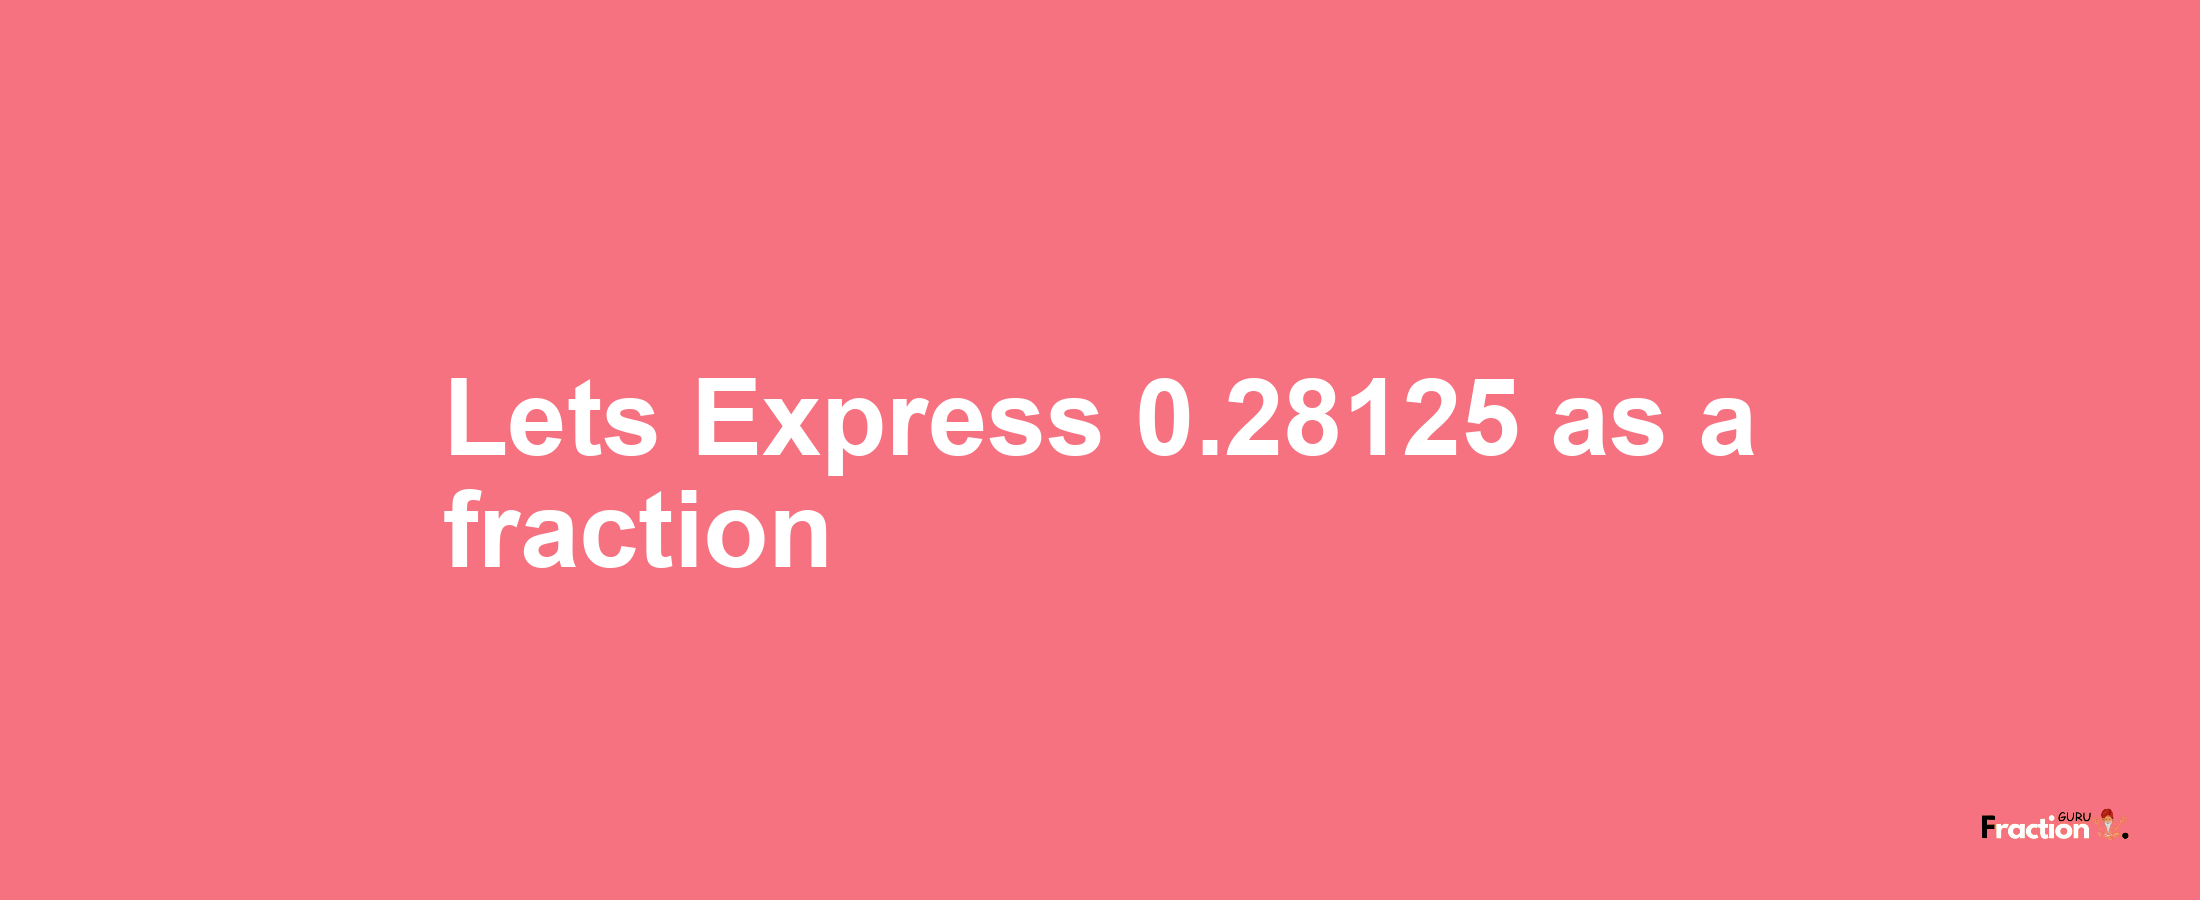 Lets Express 0.28125 as afraction